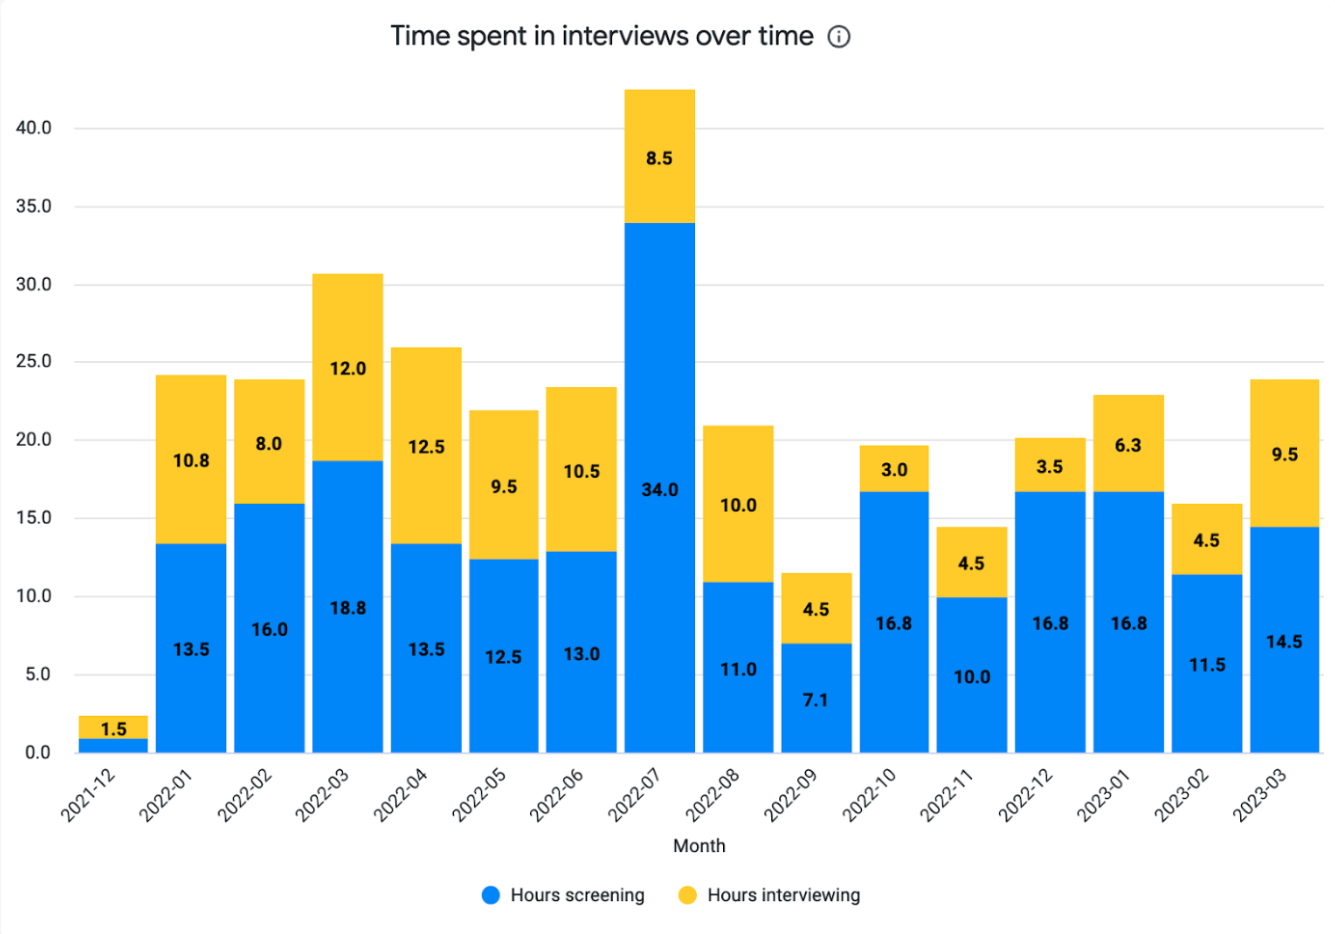 Time spent in interviews over time chart.